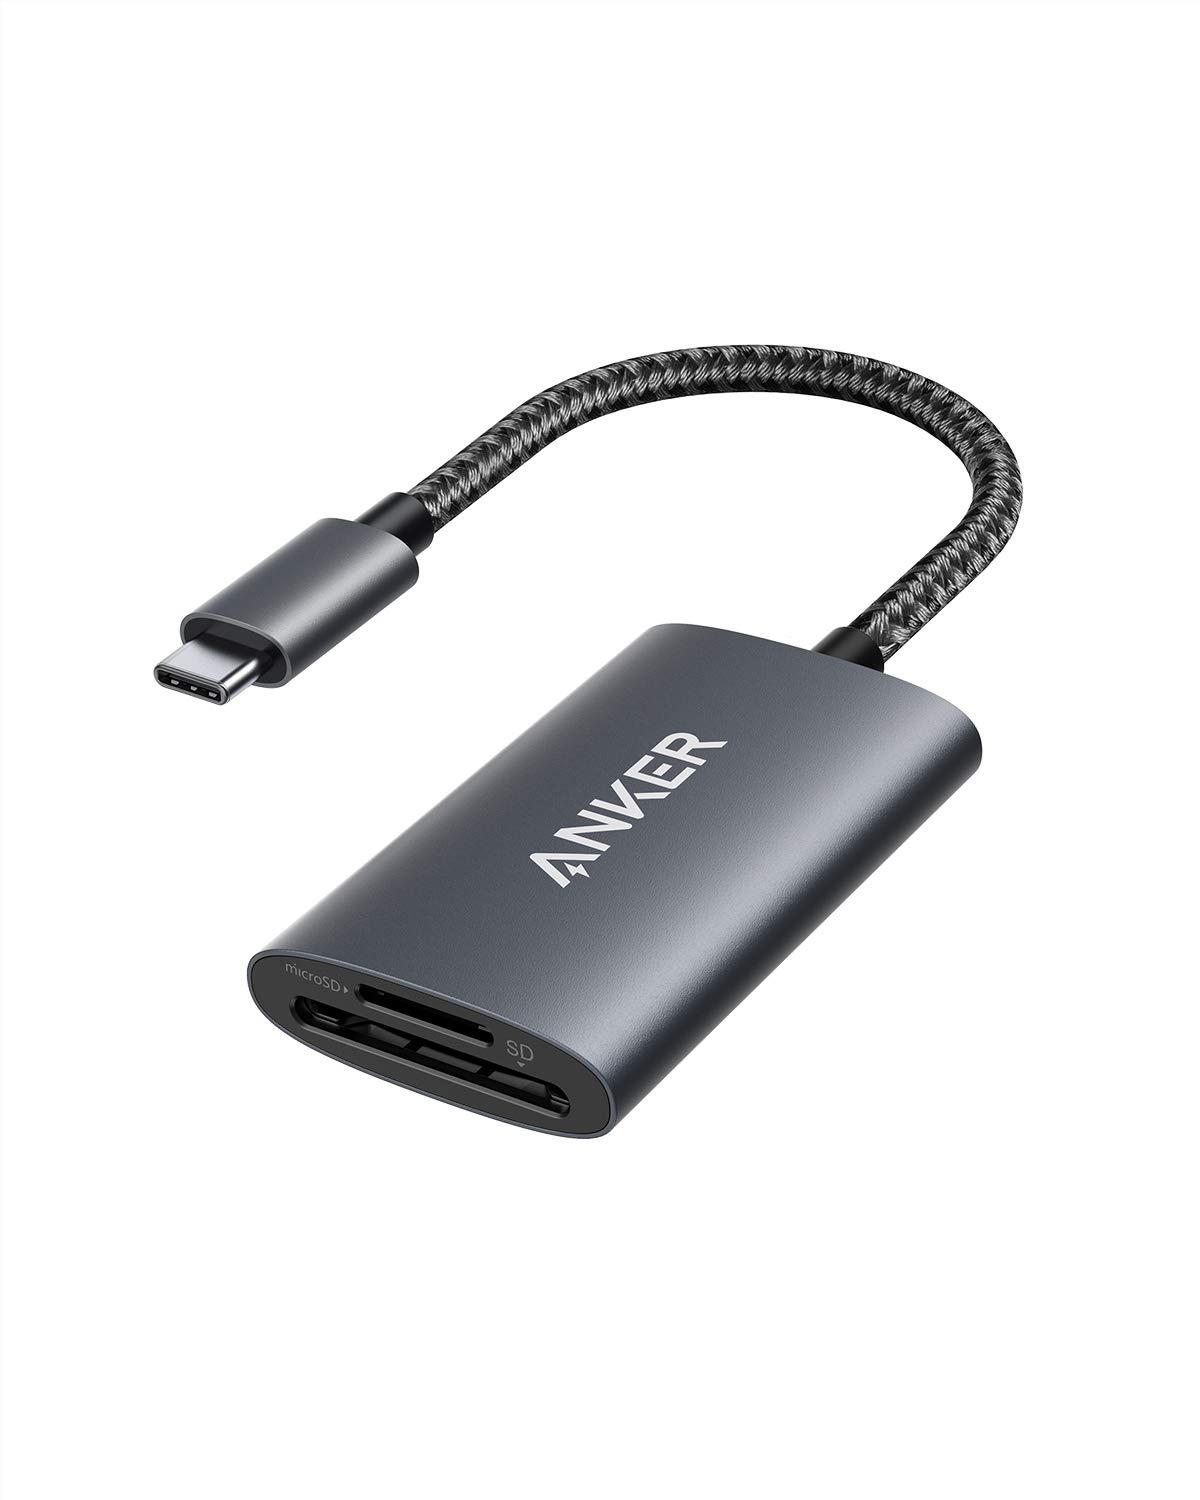 Anker USB-C SD 4.0 Card Reader, PowerExpand+ 2-in-1 Memory Card Reader, for  SDXC, SDHC, SD, MMC, RS-MMC, Micro SDXC, Micro SD, Micro SDHC Card, UHS-II,  and UHS-I Cards : Amazon.in: Electronics